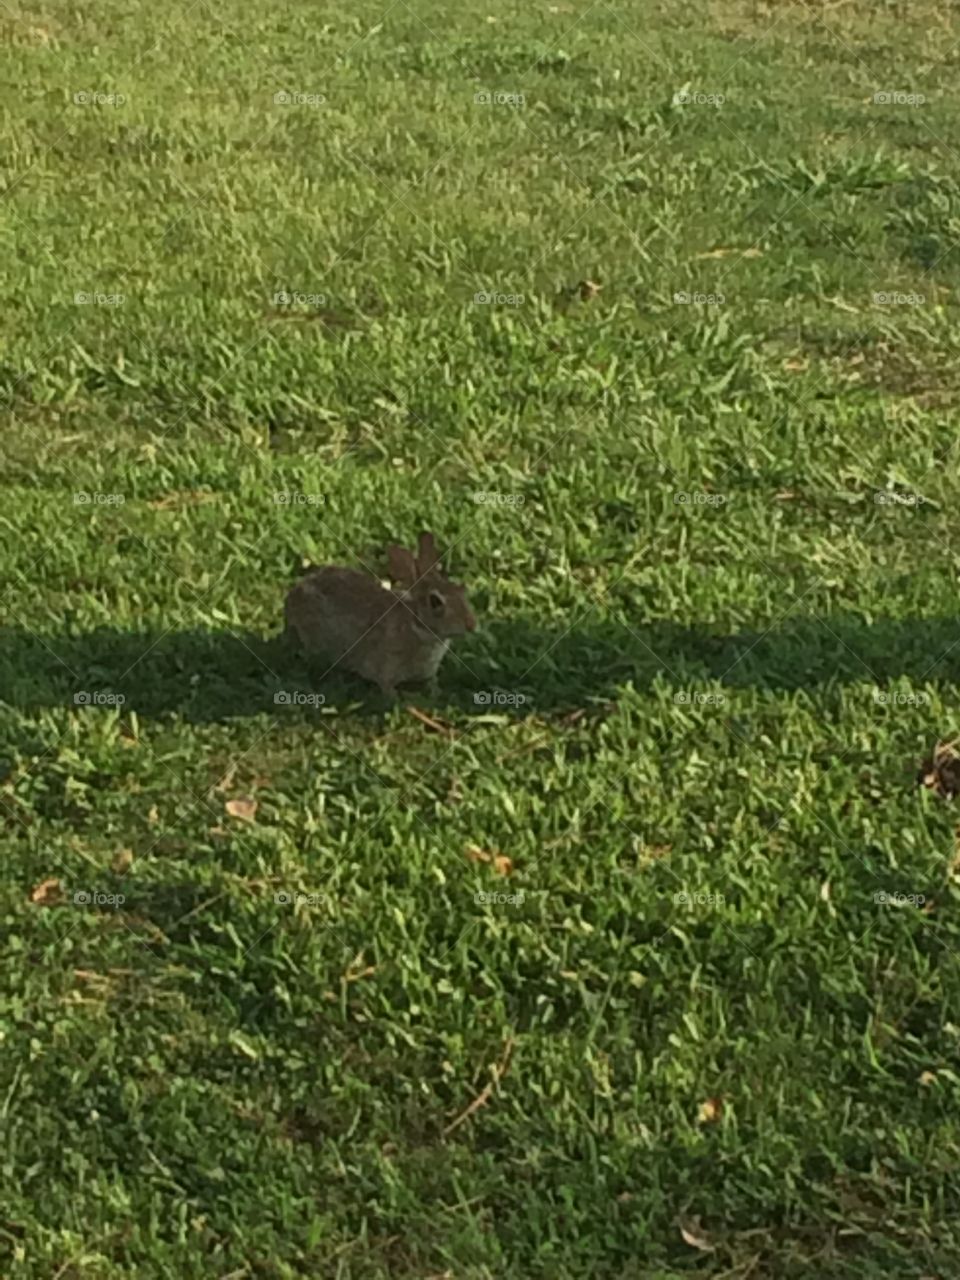 The Rabbit. This is a rabbit that is always around the local YMCA.